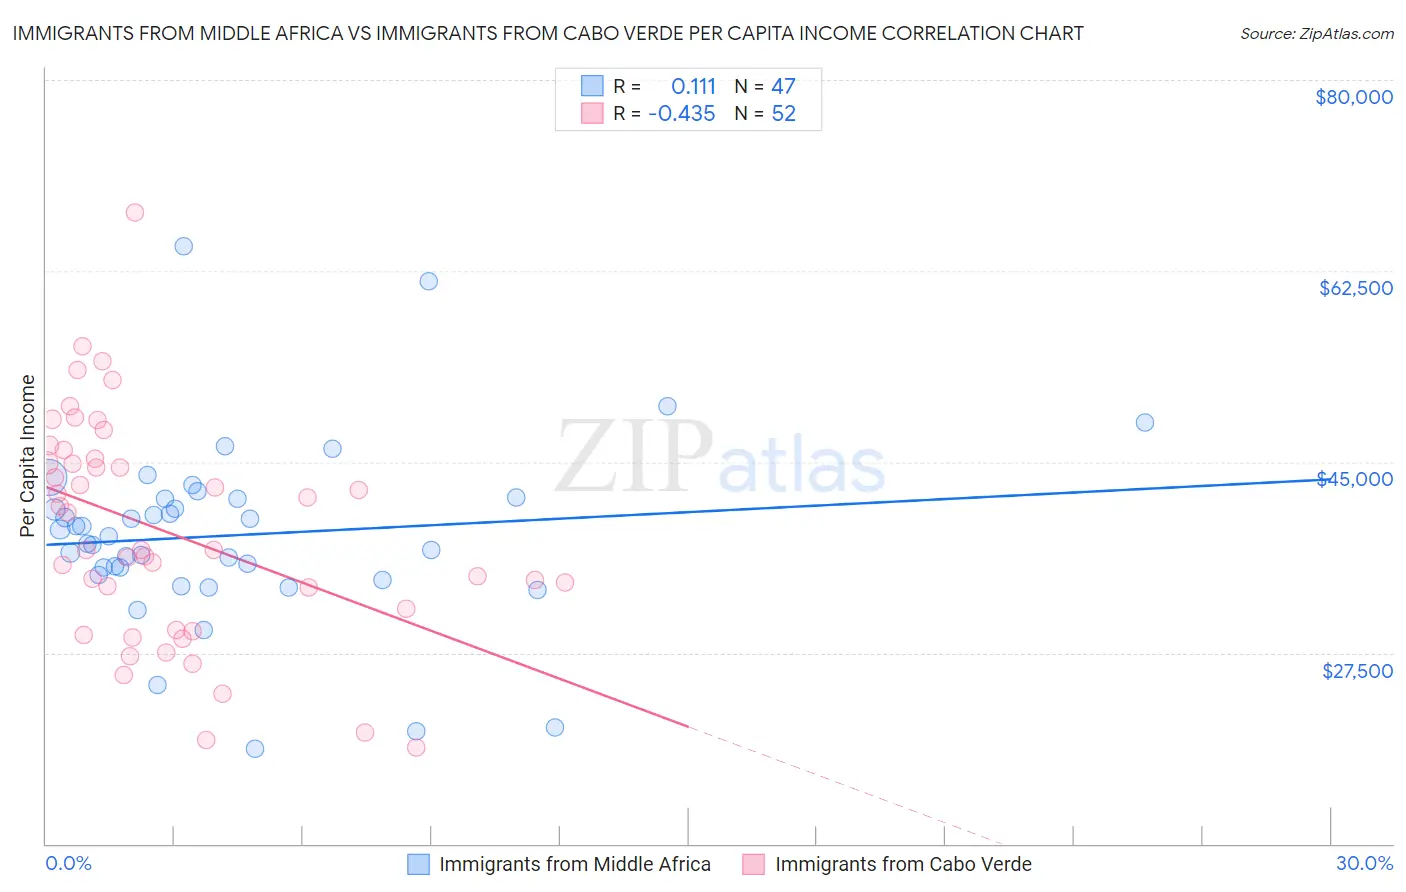 Immigrants from Middle Africa vs Immigrants from Cabo Verde Per Capita Income